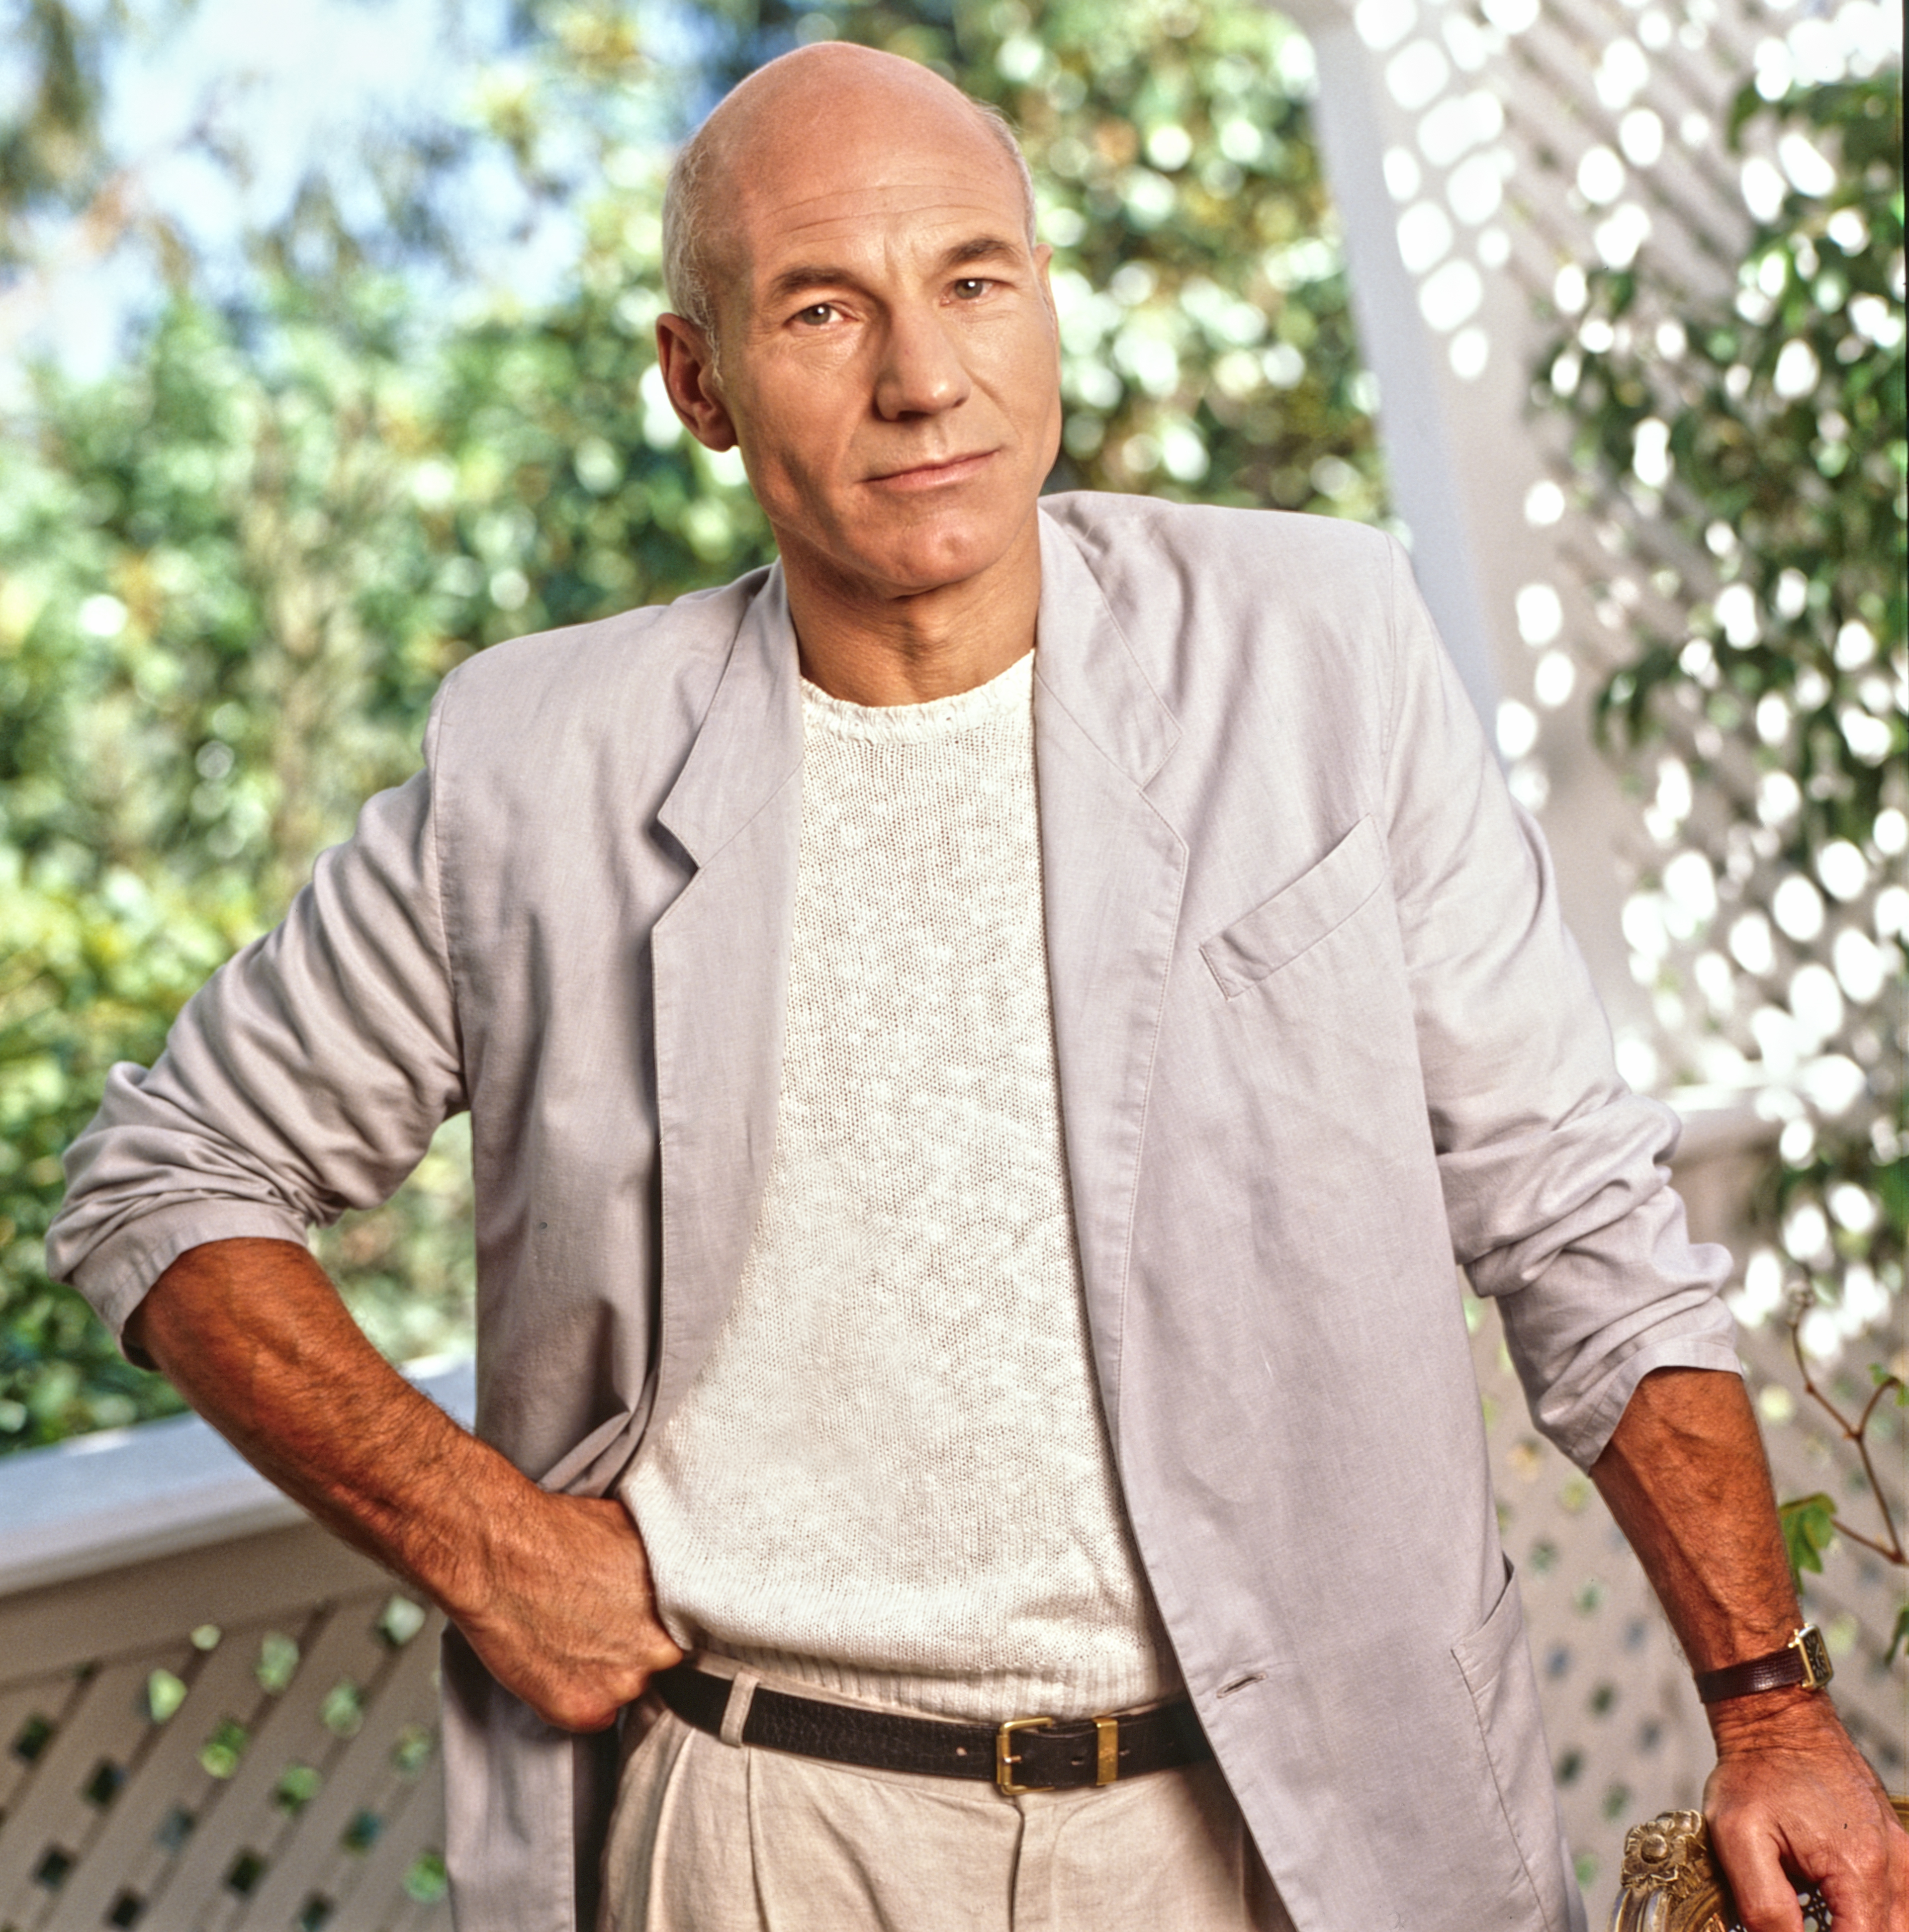 Patrick Stewart stands with hands on hips, wearing a light jacket and sweater